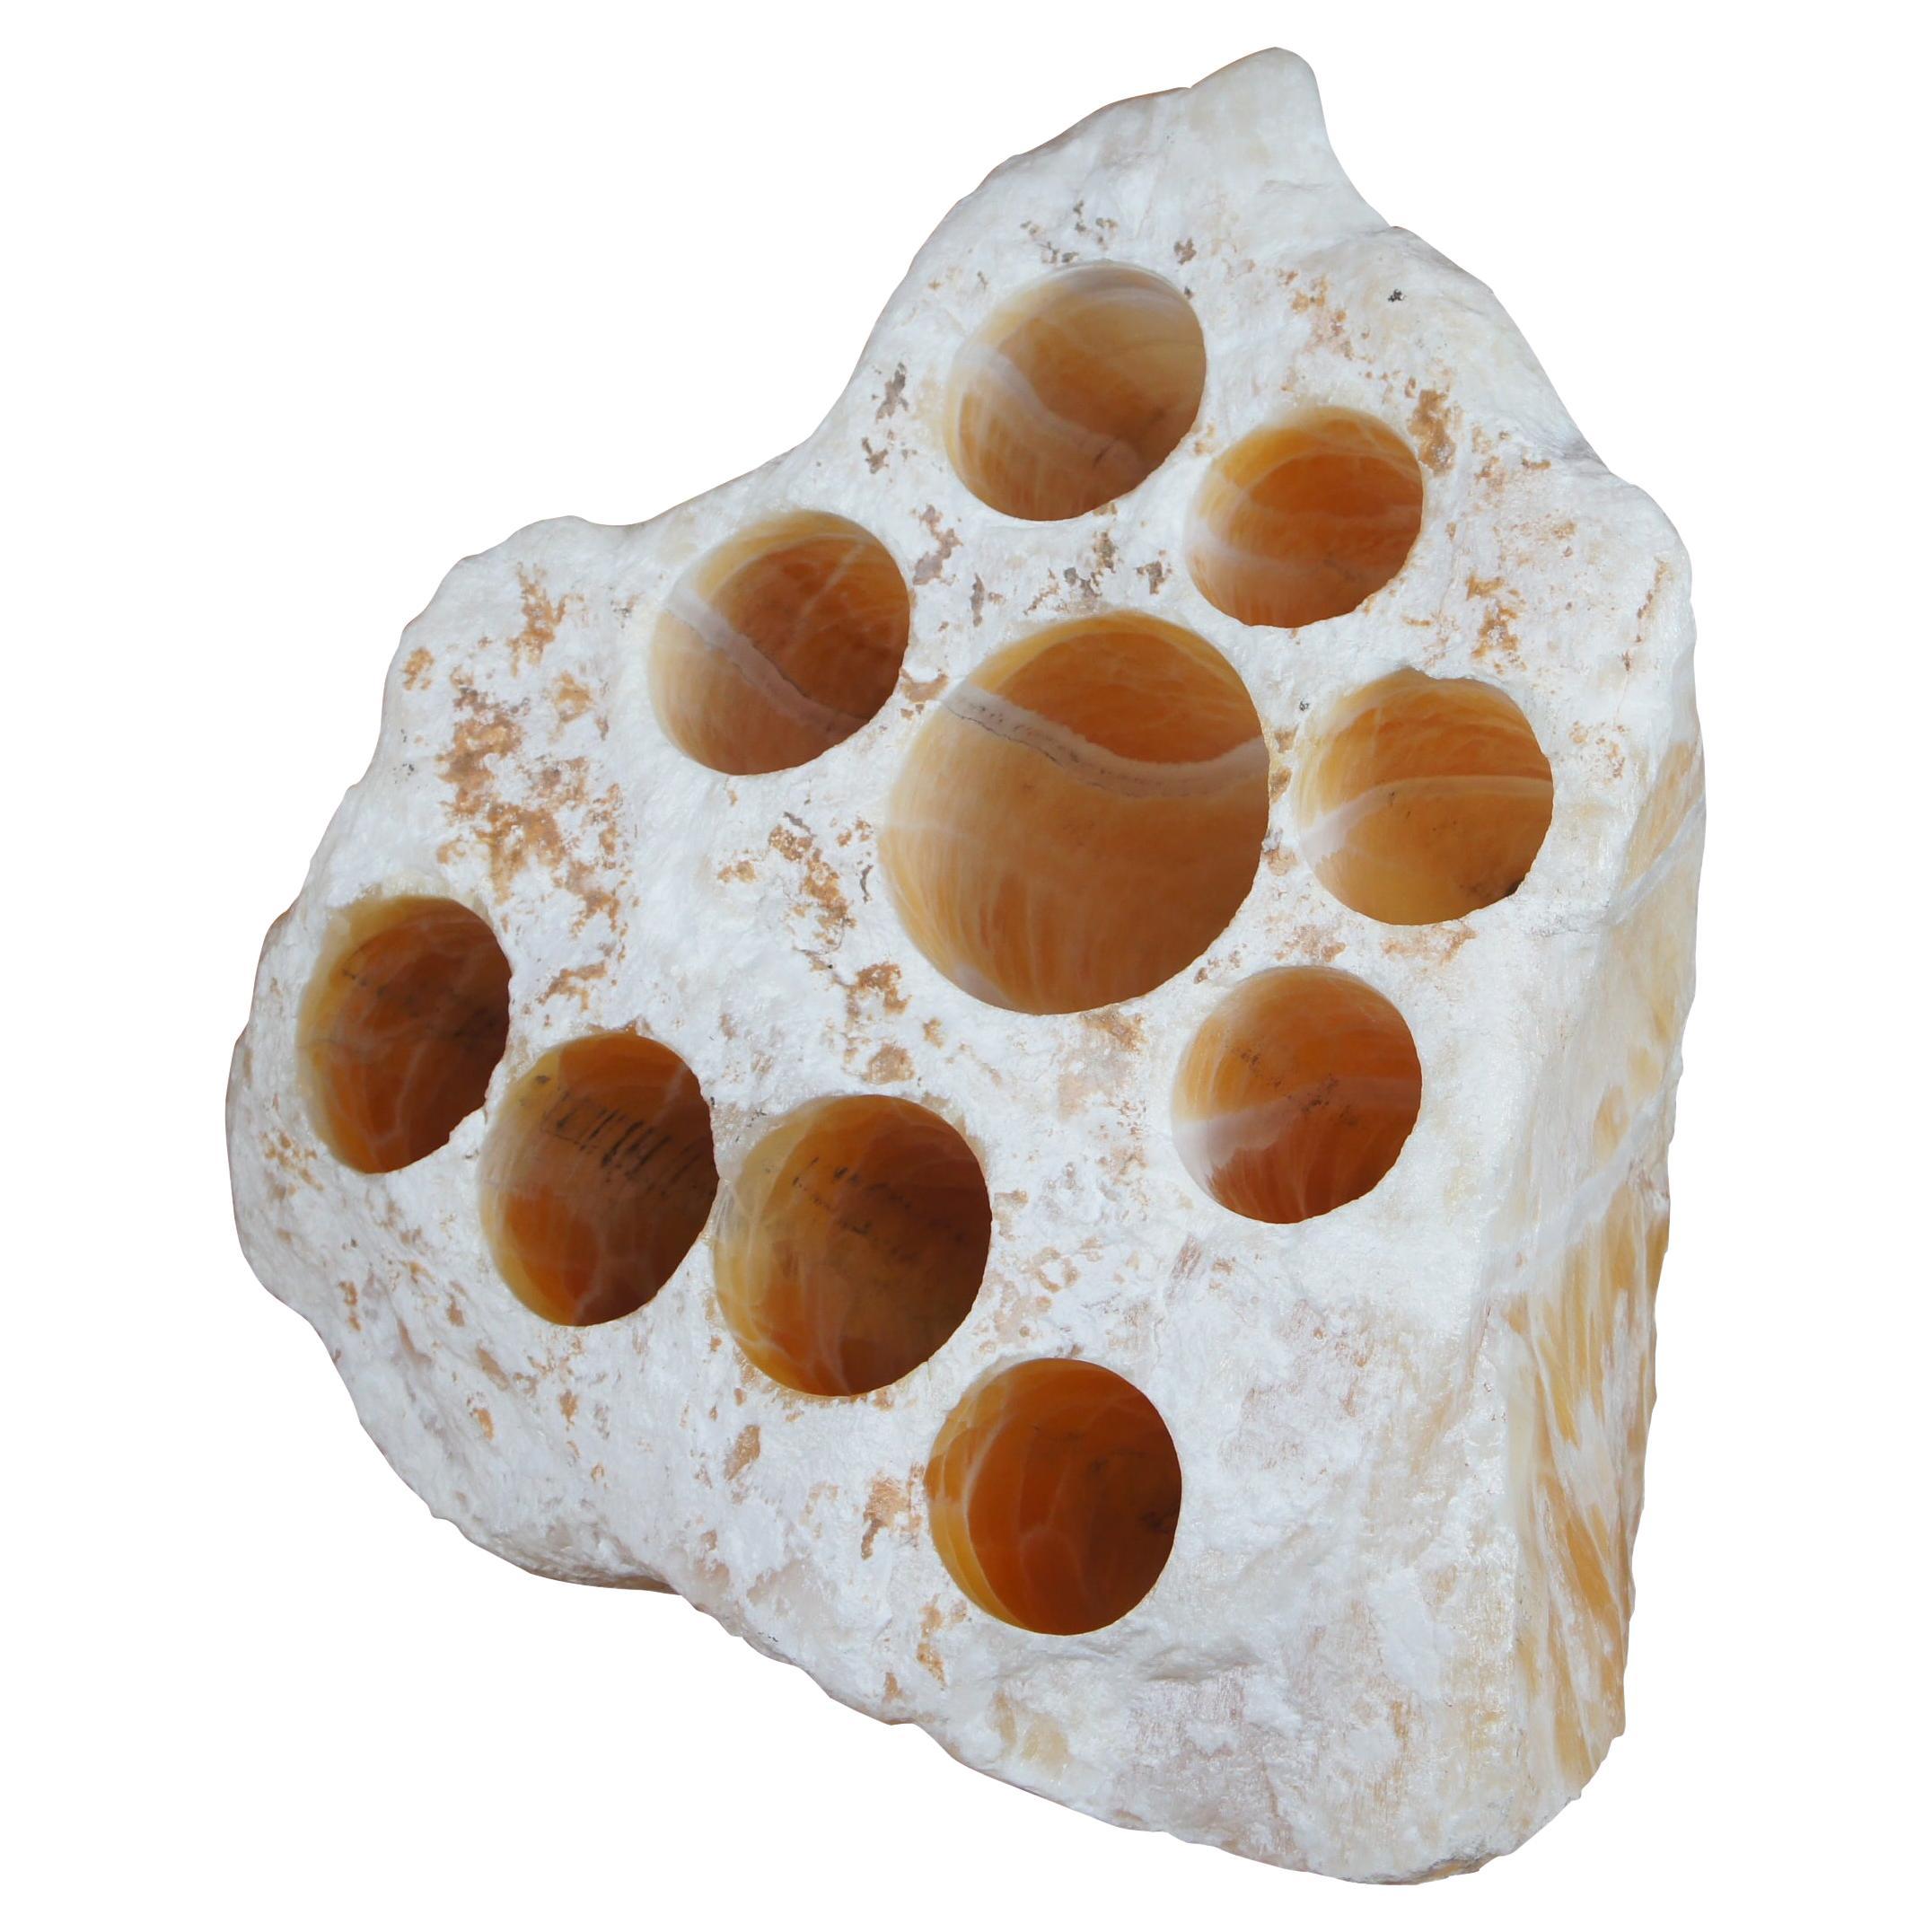 102lb Honeycomb Calcite Amber Onyx Rock Stone Crystal Formation Drilled Holes For Sale